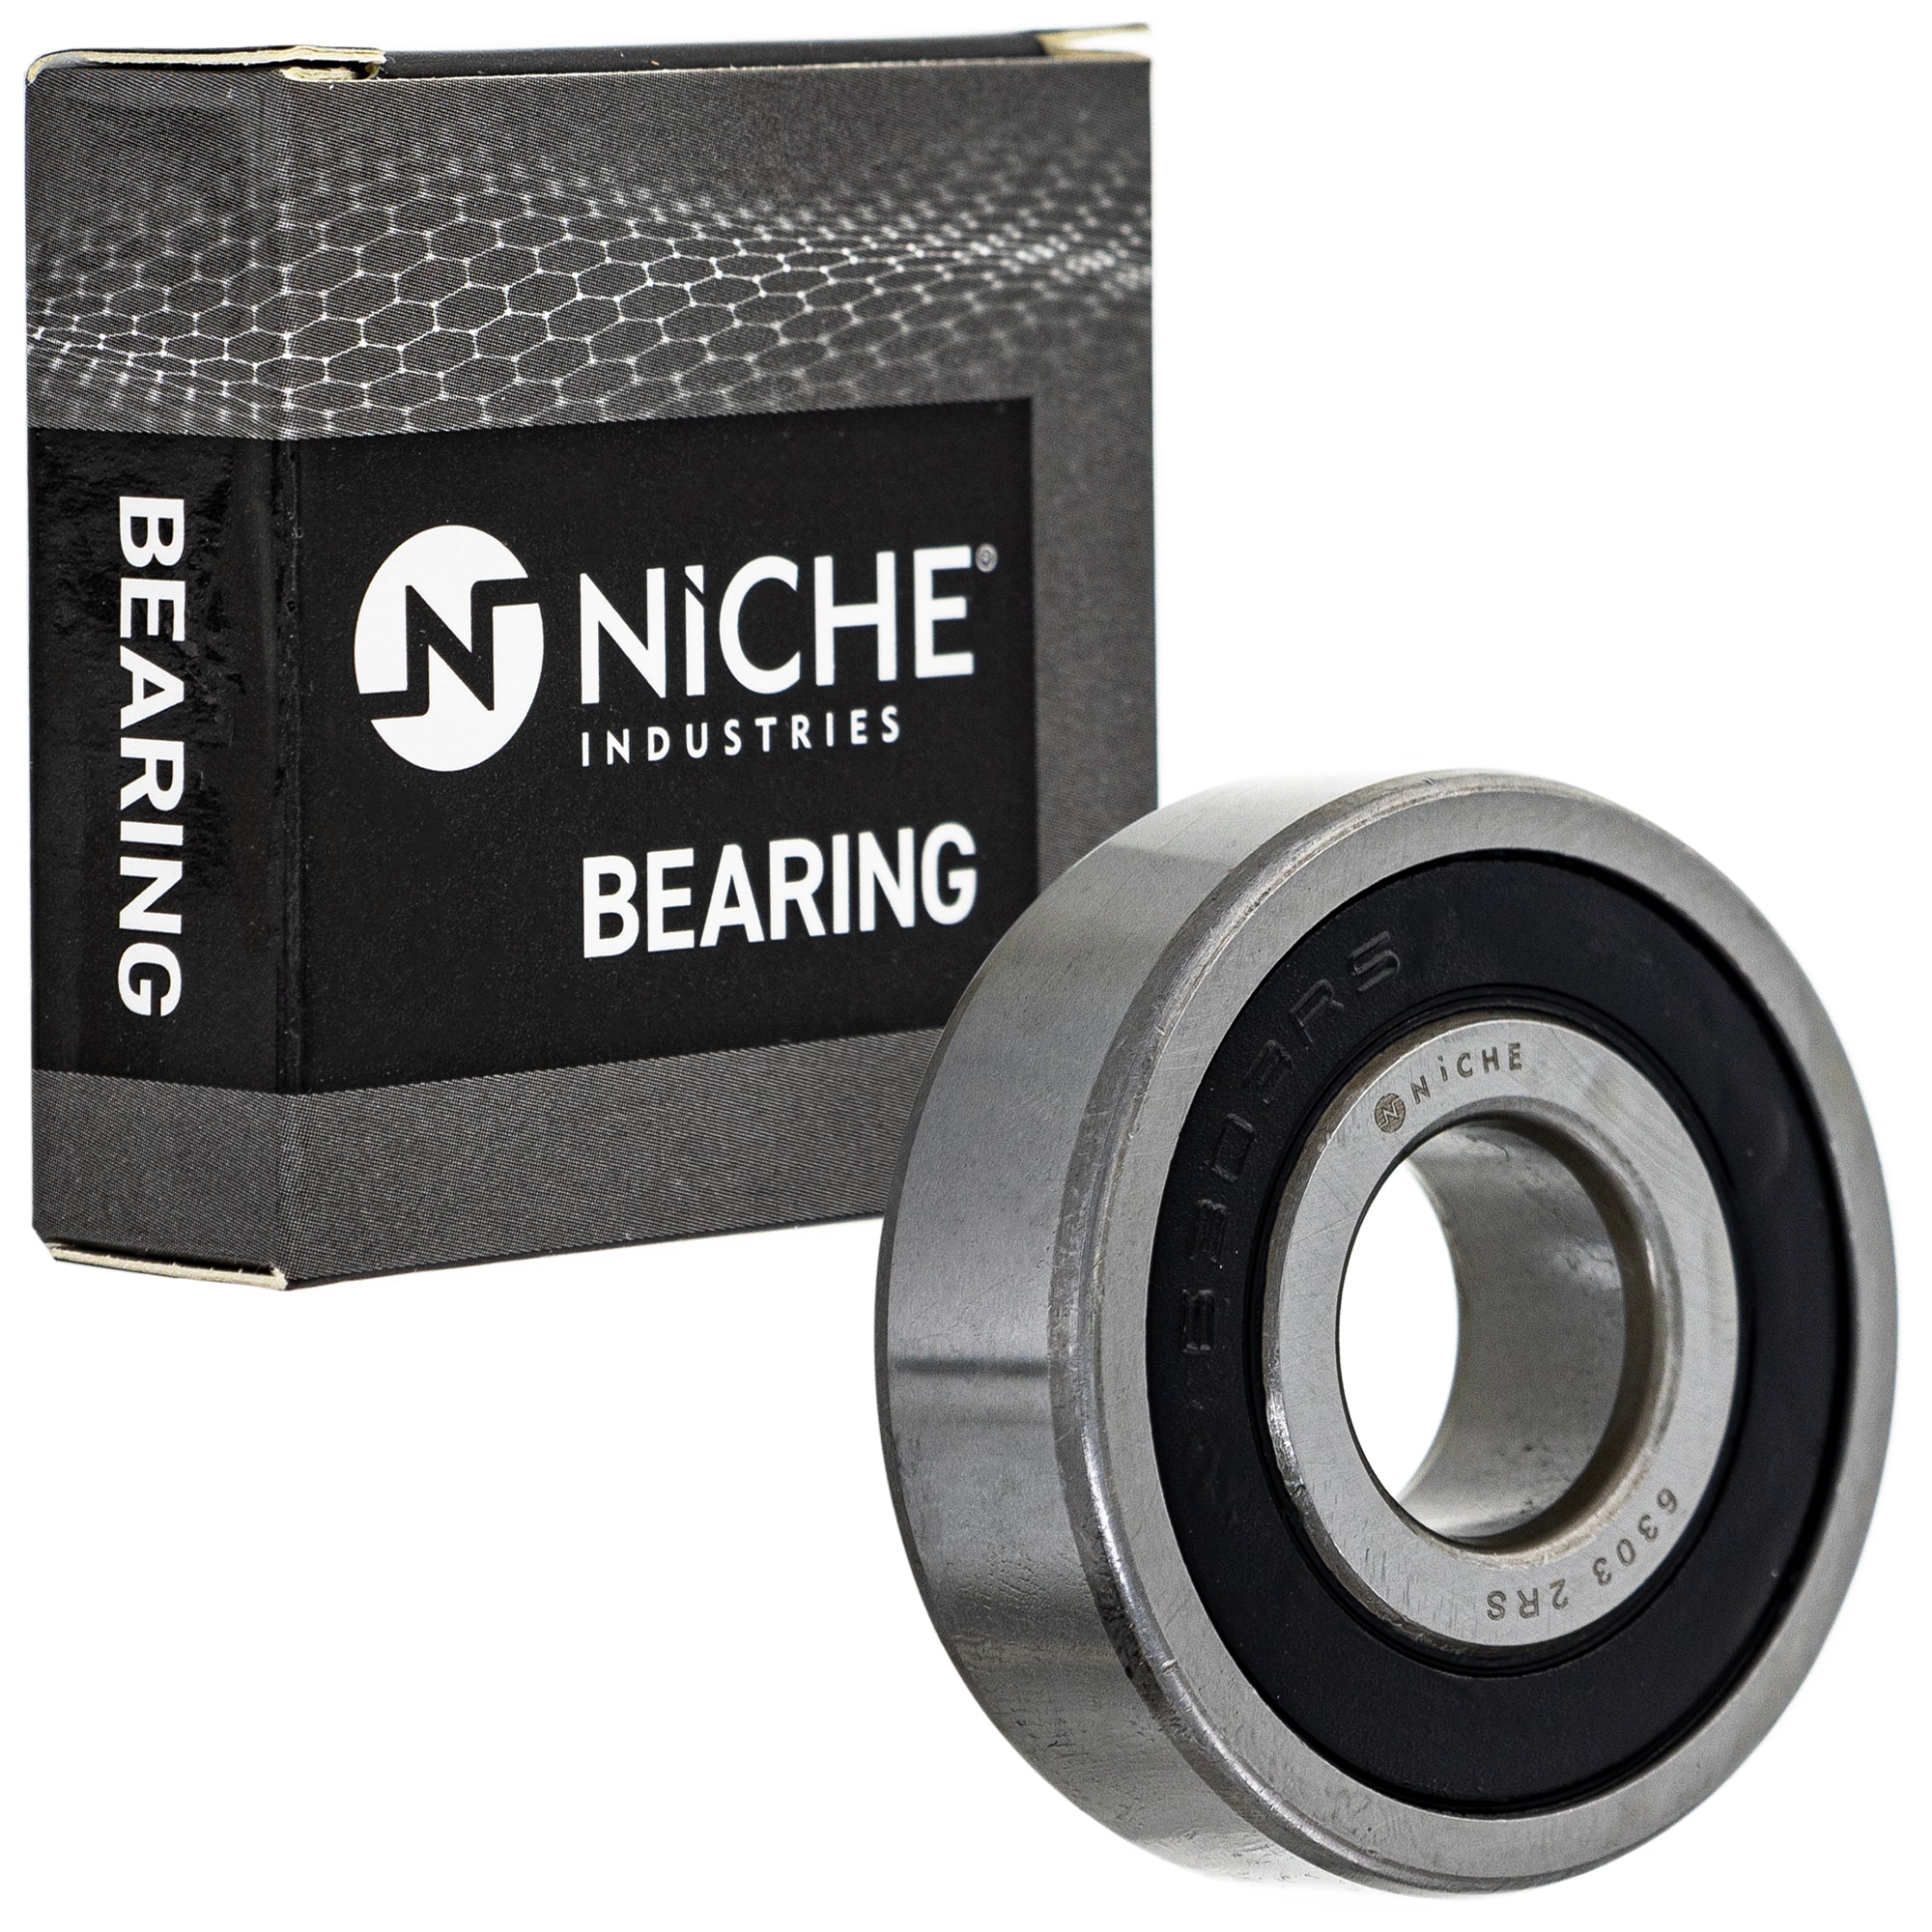 NICHE 519-CBB2236R Bearing 2-Pack for zOTHER Zephyr XS850 XS650S2